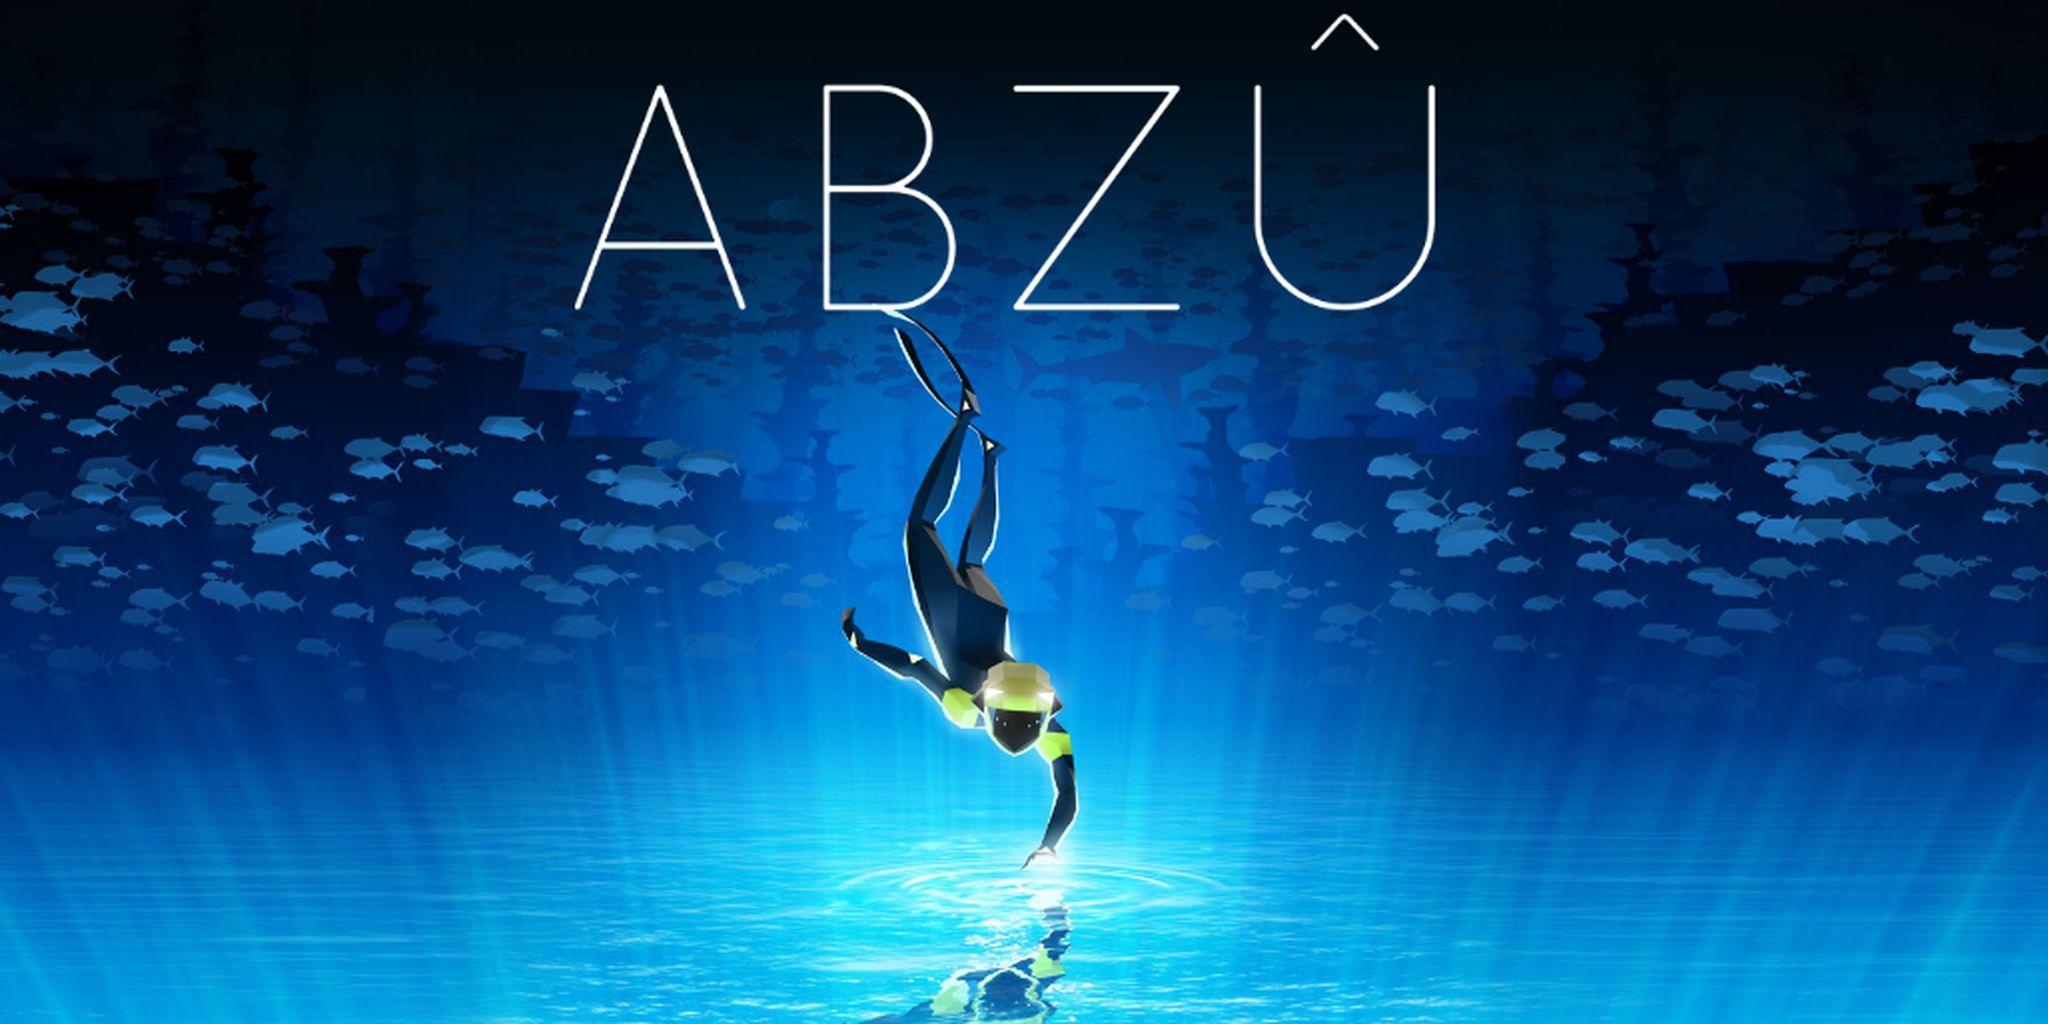 Review: Abzu Is a Beautiful Game, But It's Missing Something